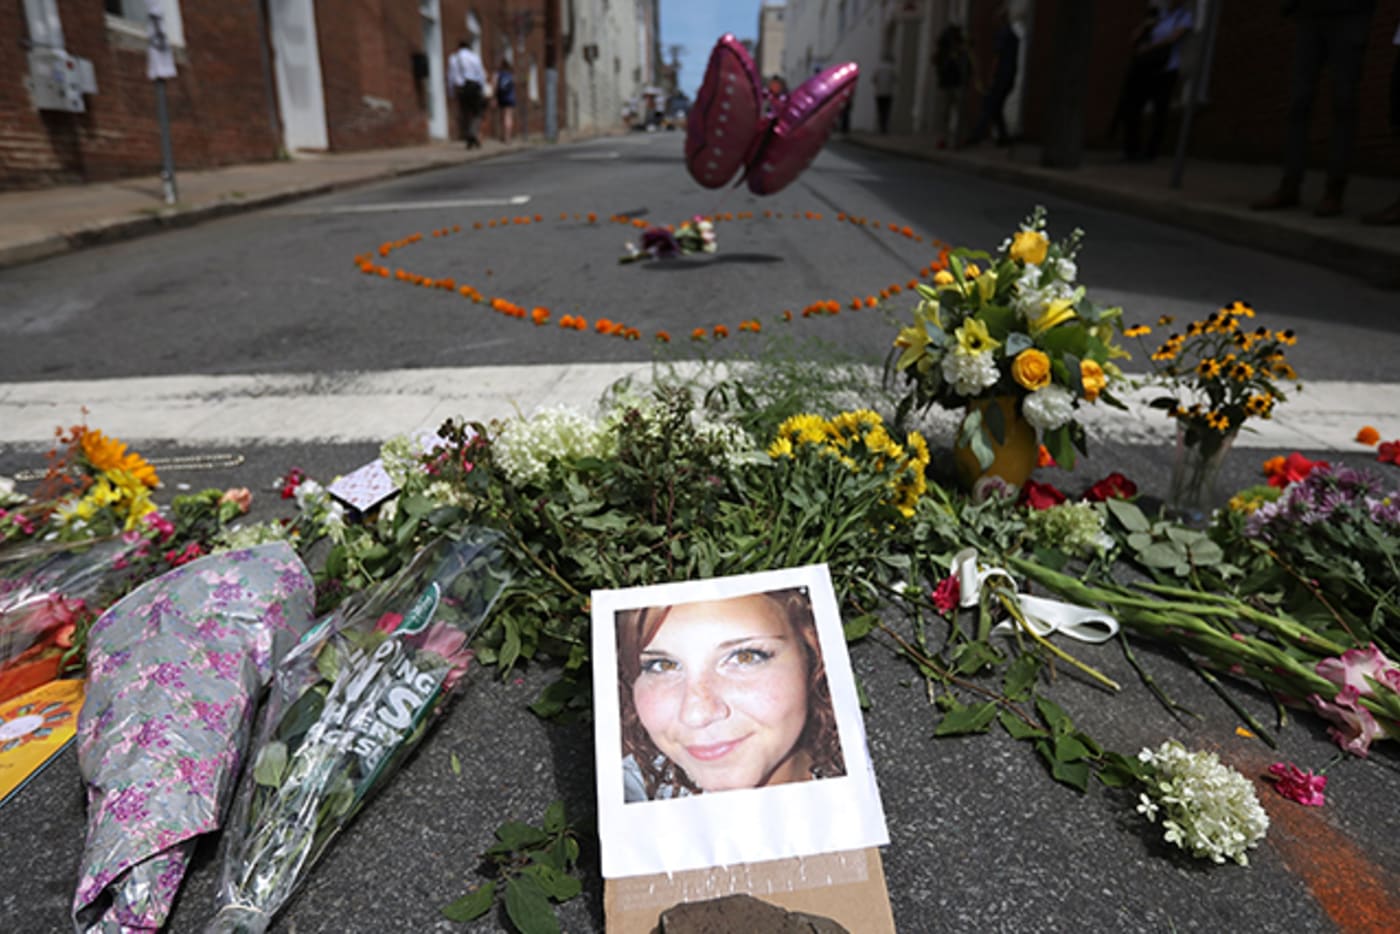 Flowers surround a photo of 32 year old Heather Heyer